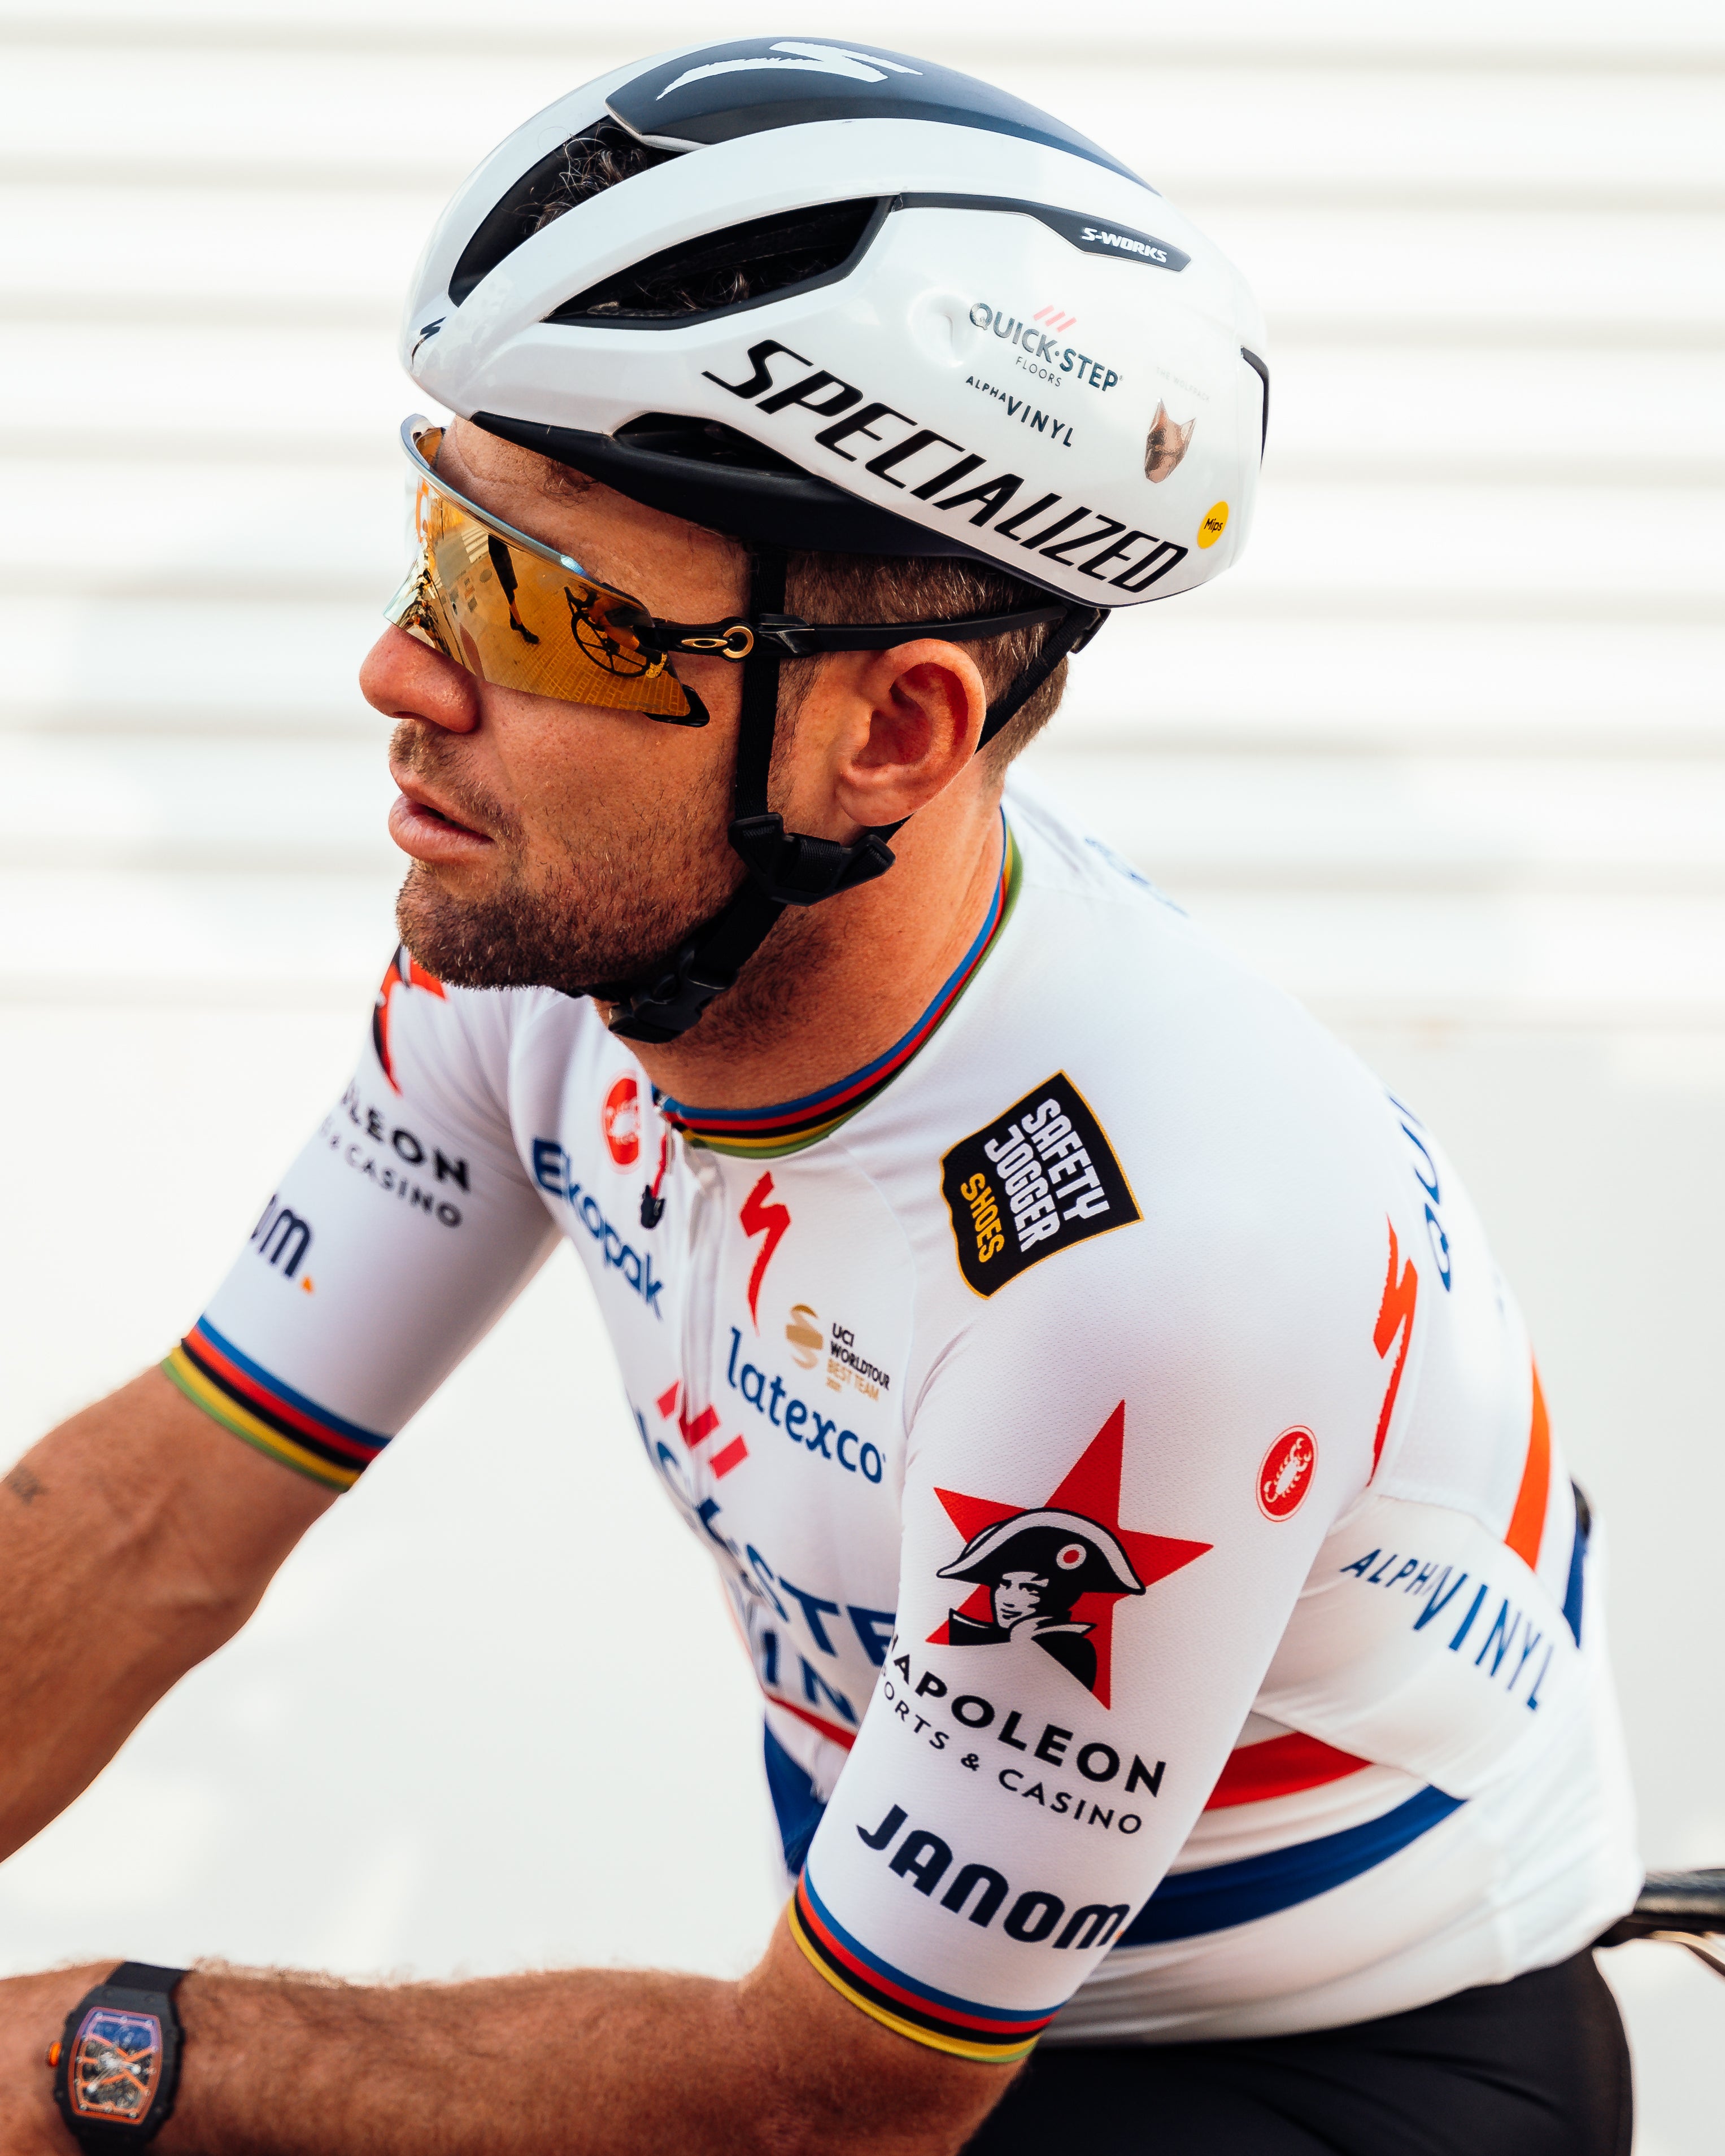 Mark Cavendish on his new approach to life – Rouleur